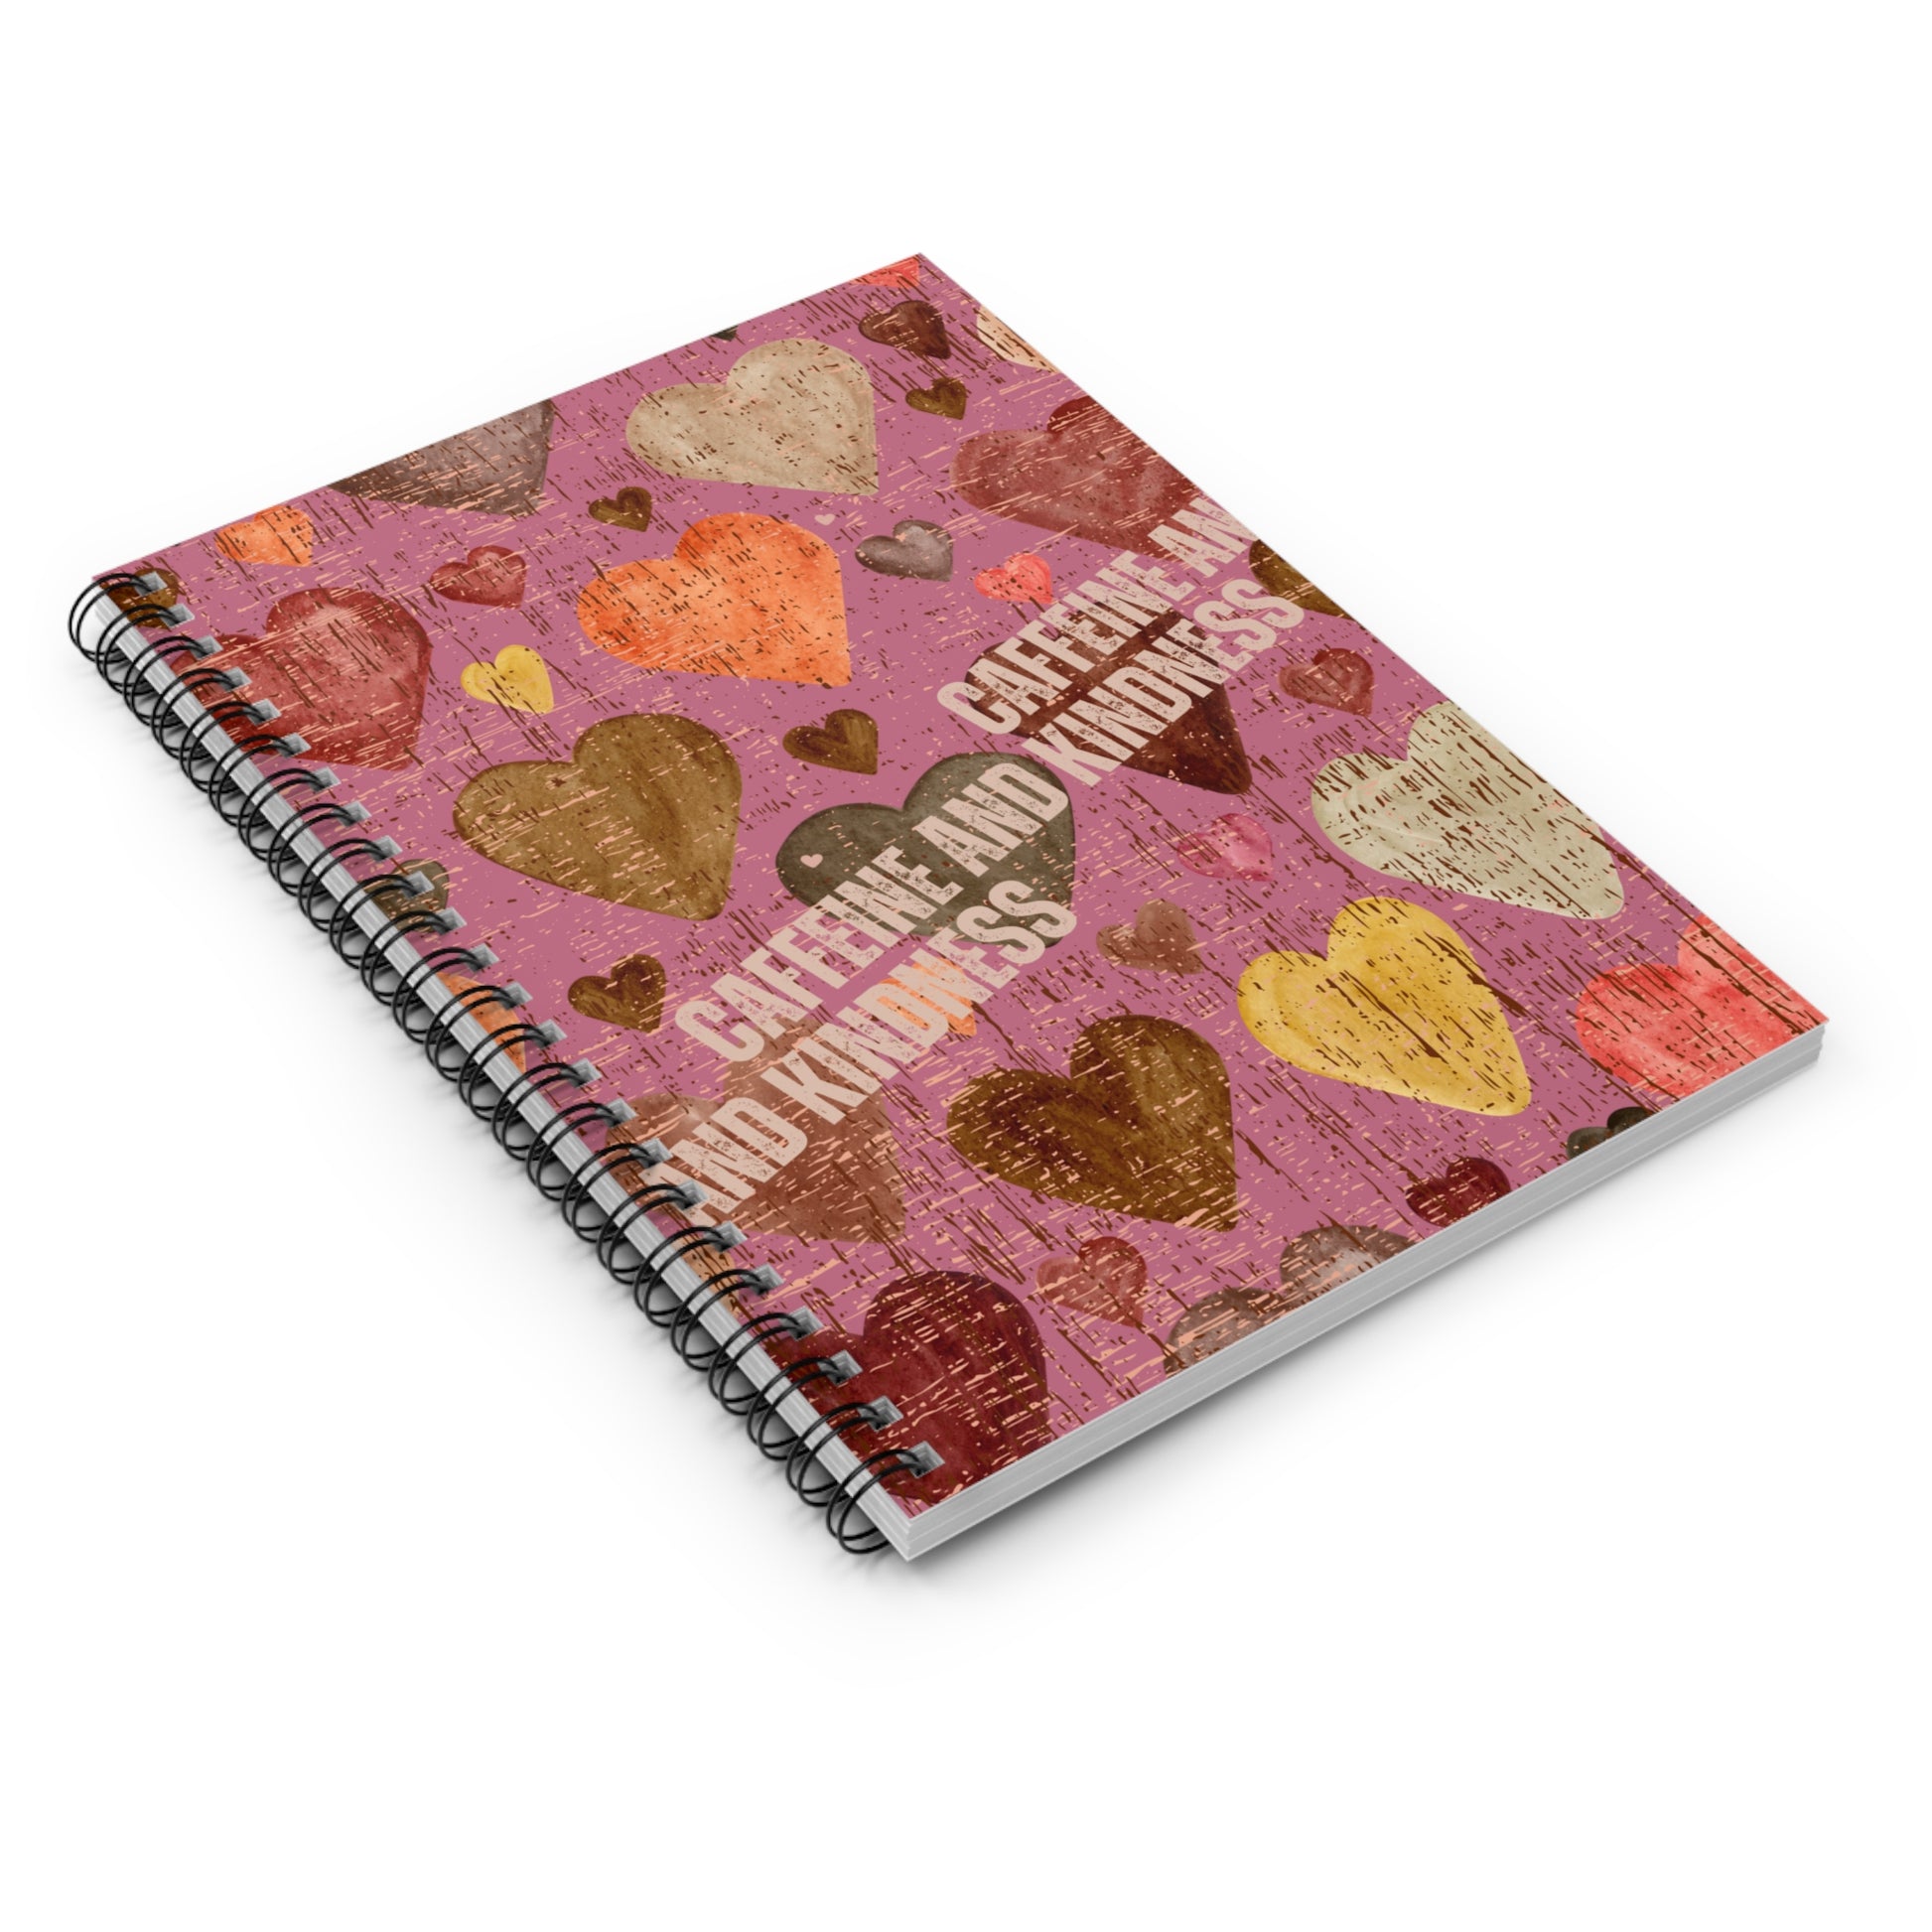 Caffeine & Kindness Harmony: Heartfelt Spiral Notebook for Uplifting Thoughts and Java-Inspired Reflections - Eddy and Rita